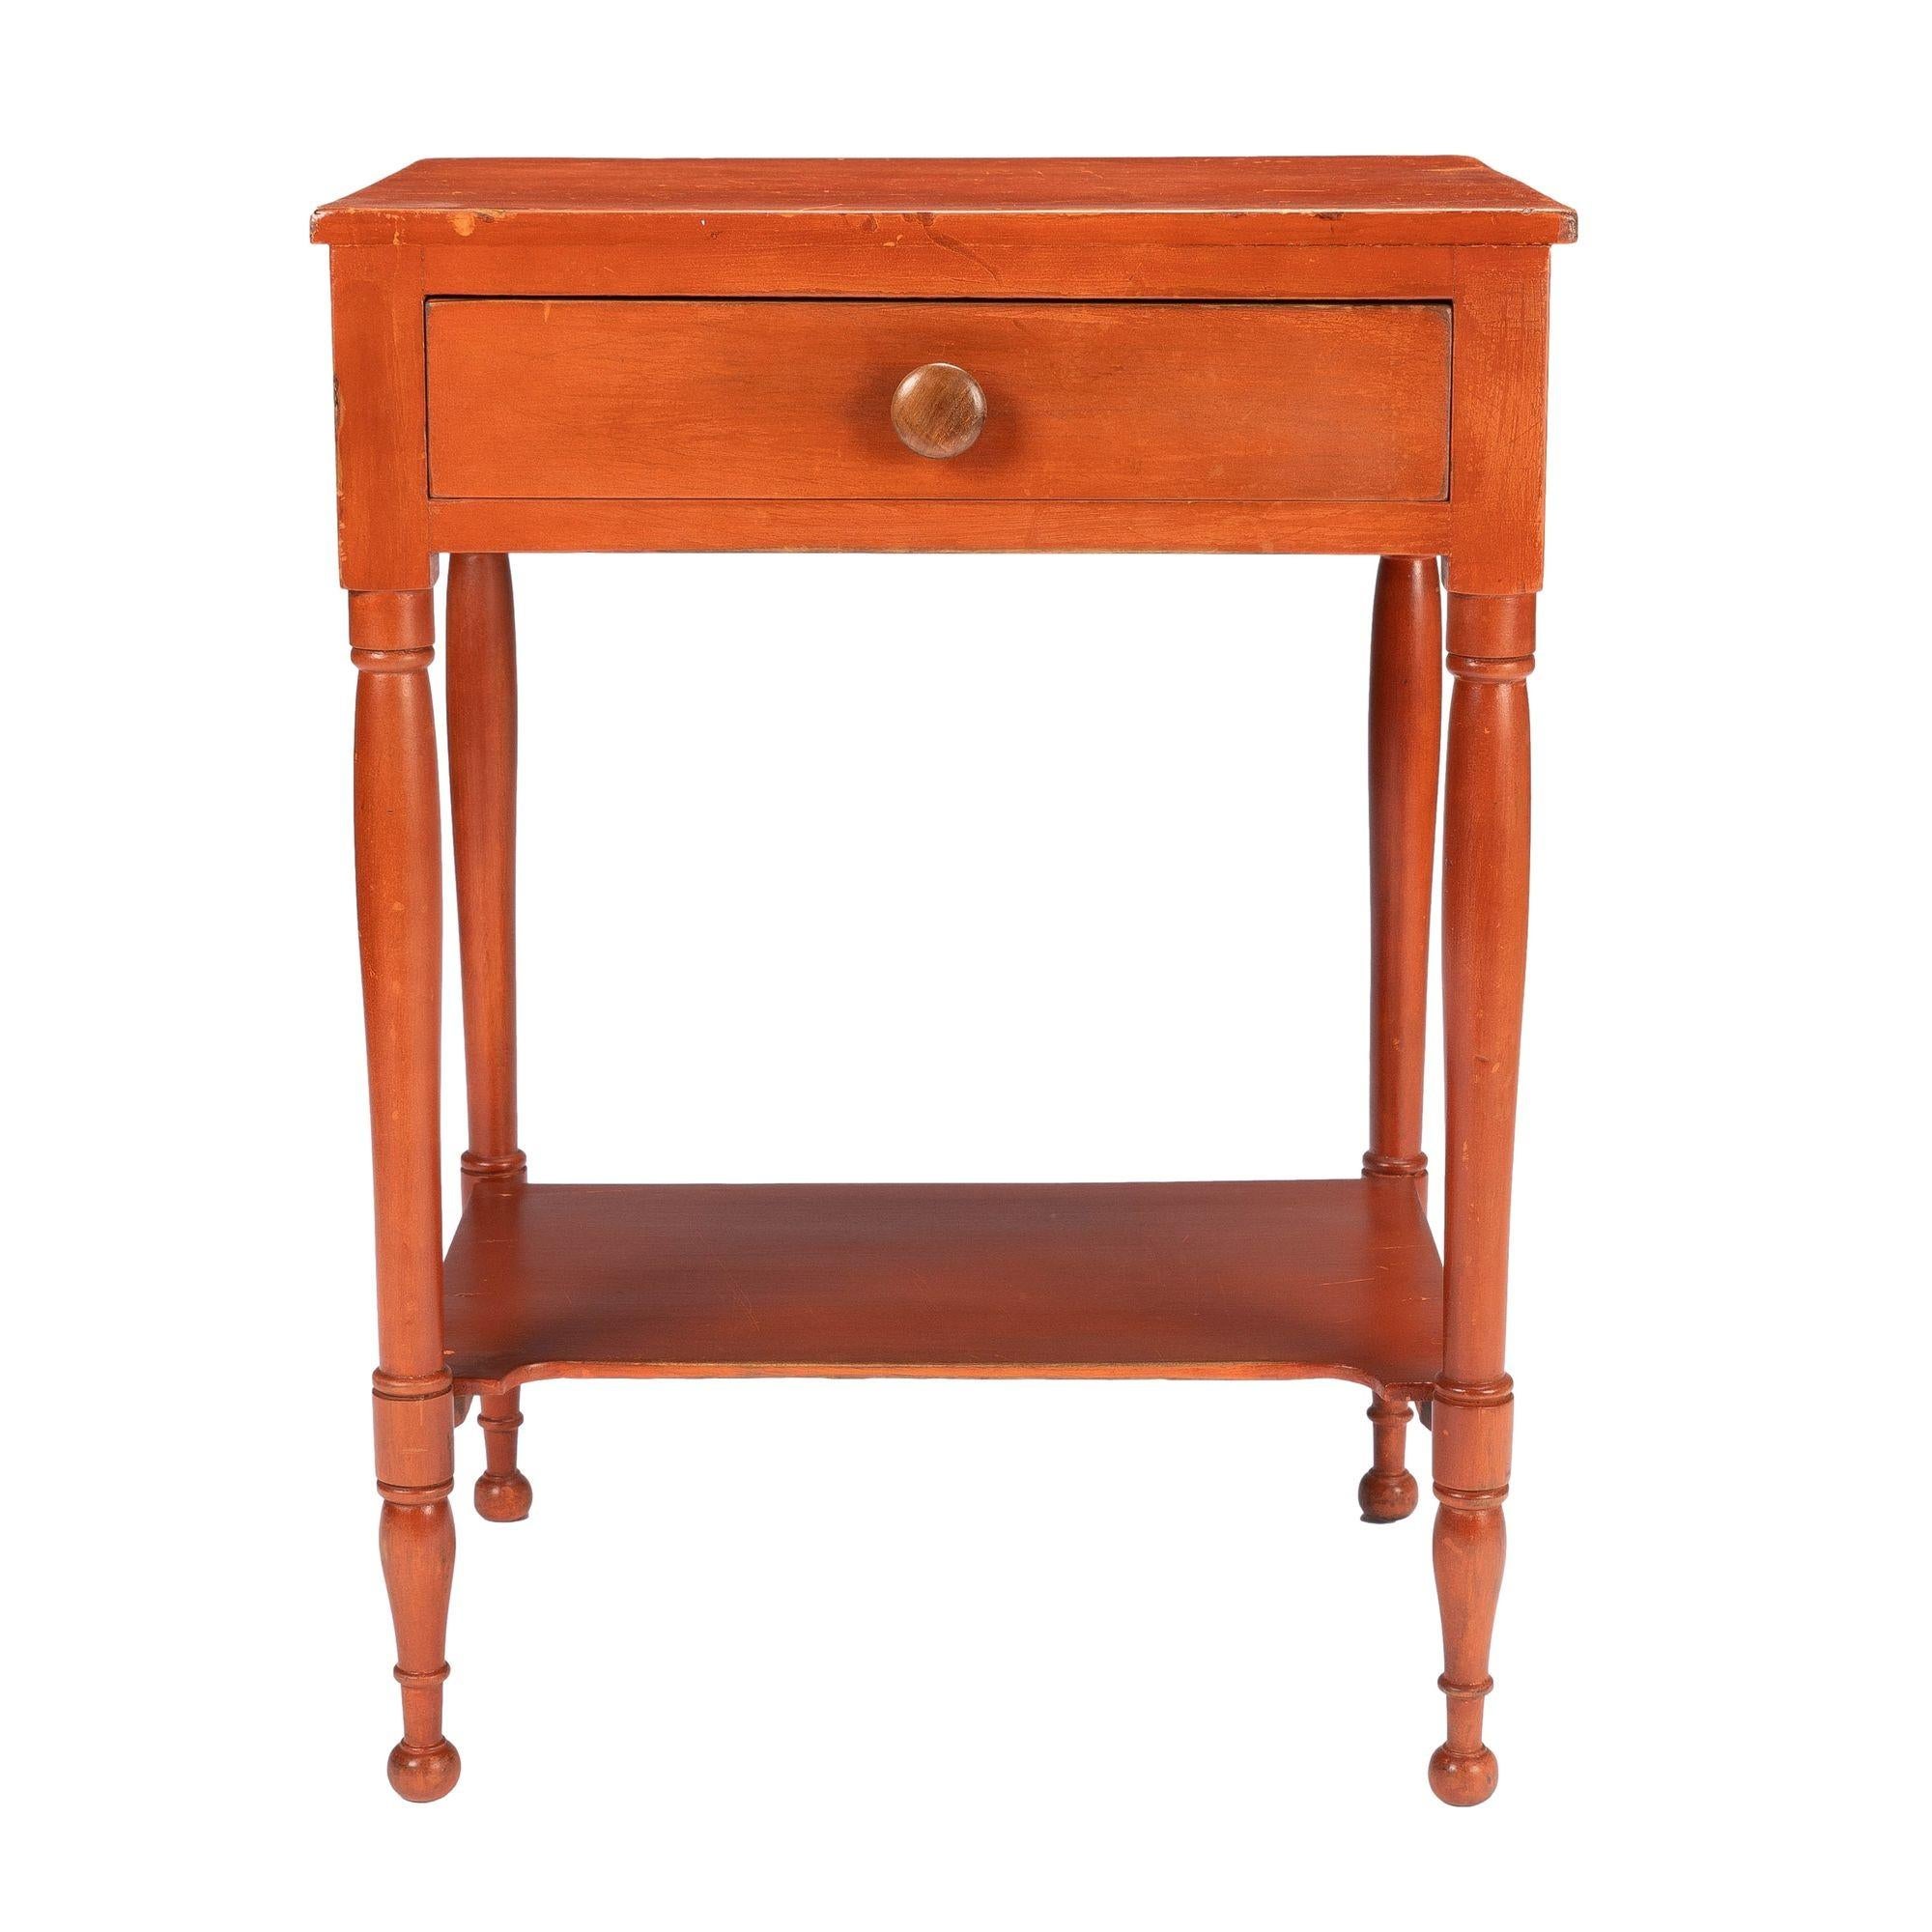 American Sheraton painted tulipwood one drawer stand with stretcher shelf. The painted surfaces have been cleaned and refreshed.
American, Southeastern Pennsylvania, circa 1820.